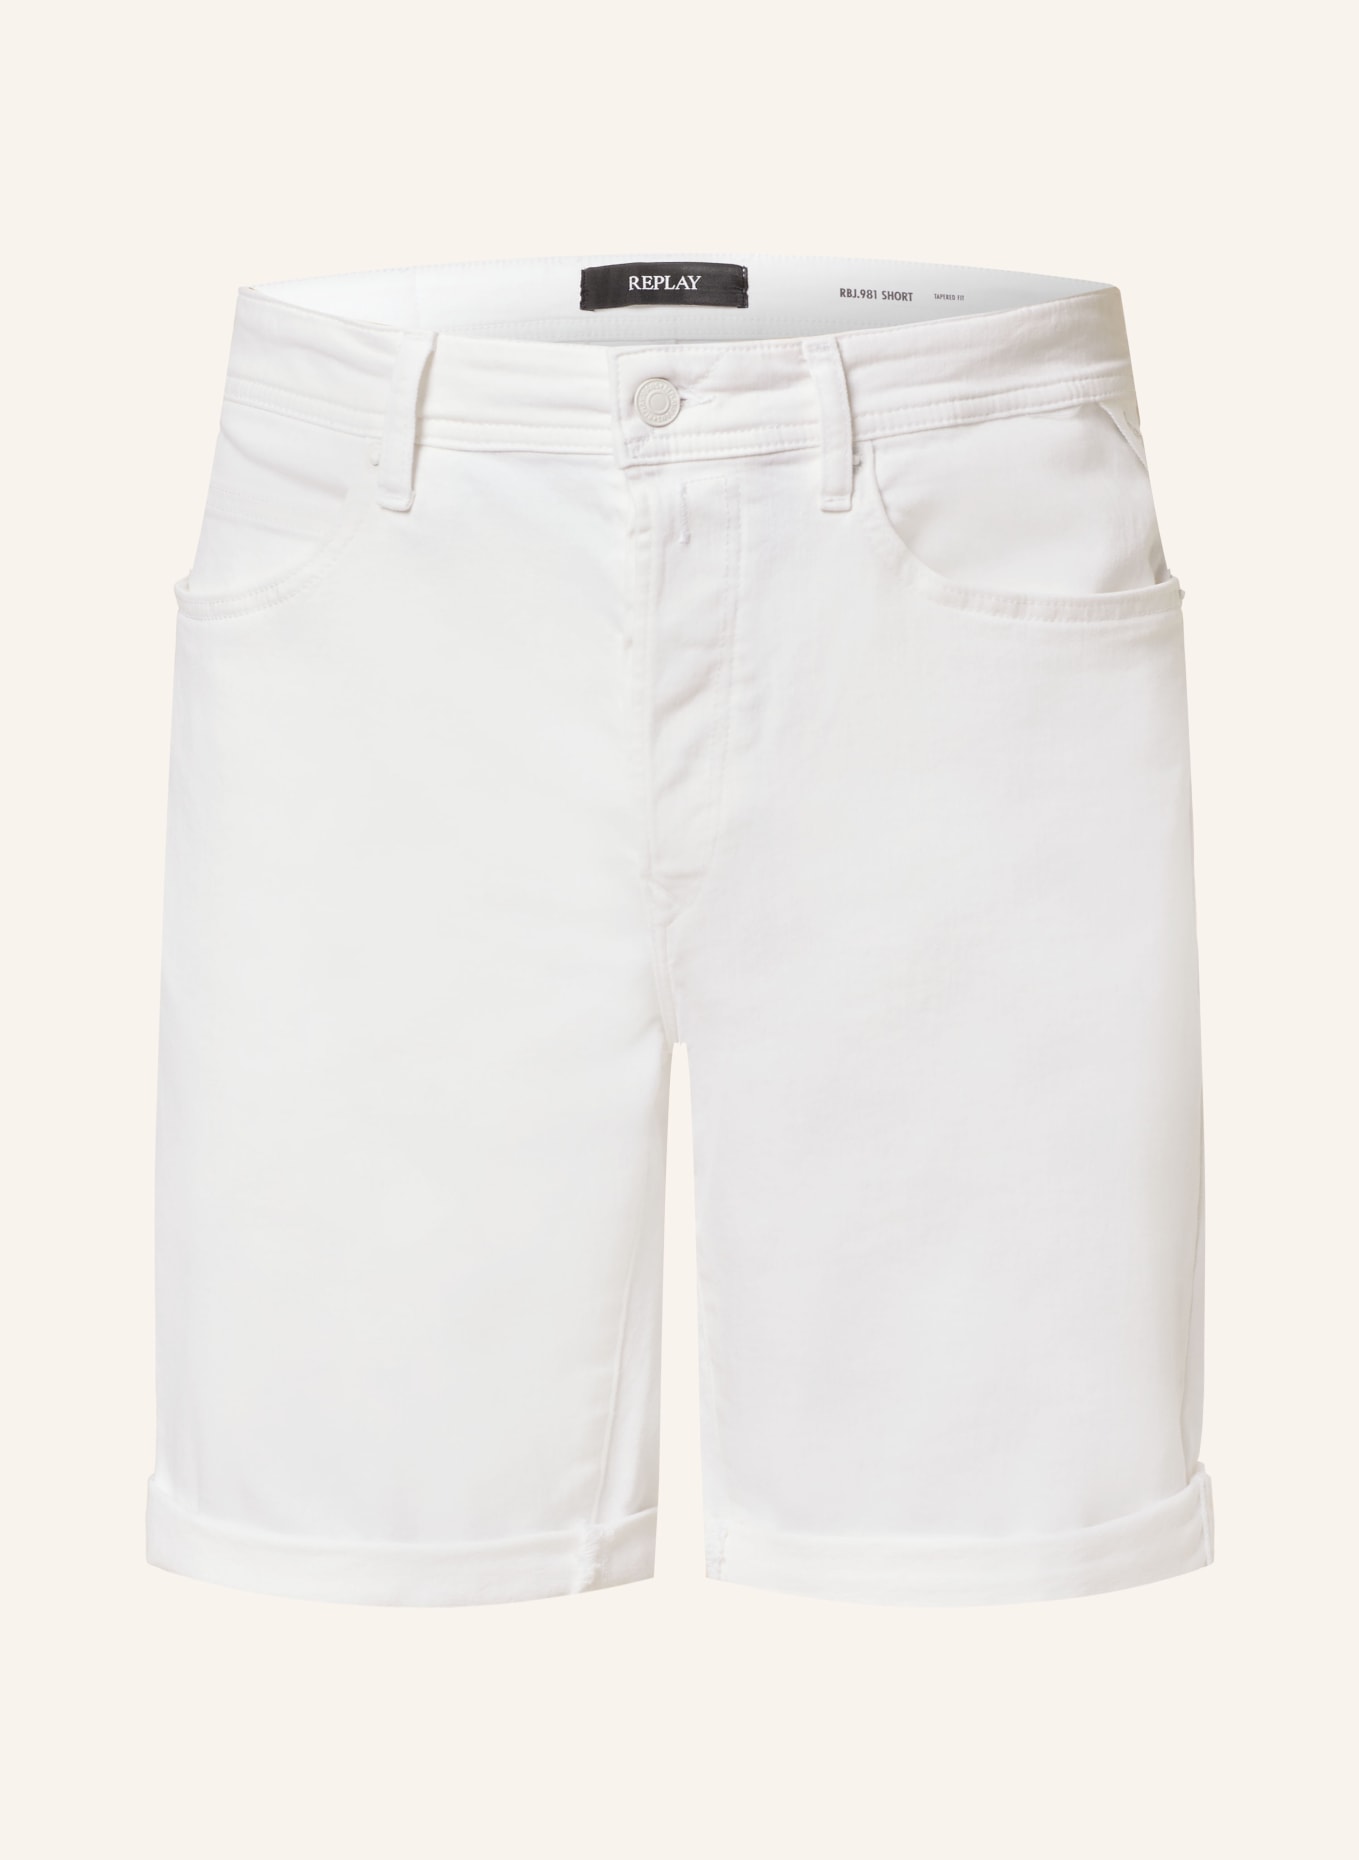 REPLAY Denim shorts tapered fit, Color: WHITE (Image 1)